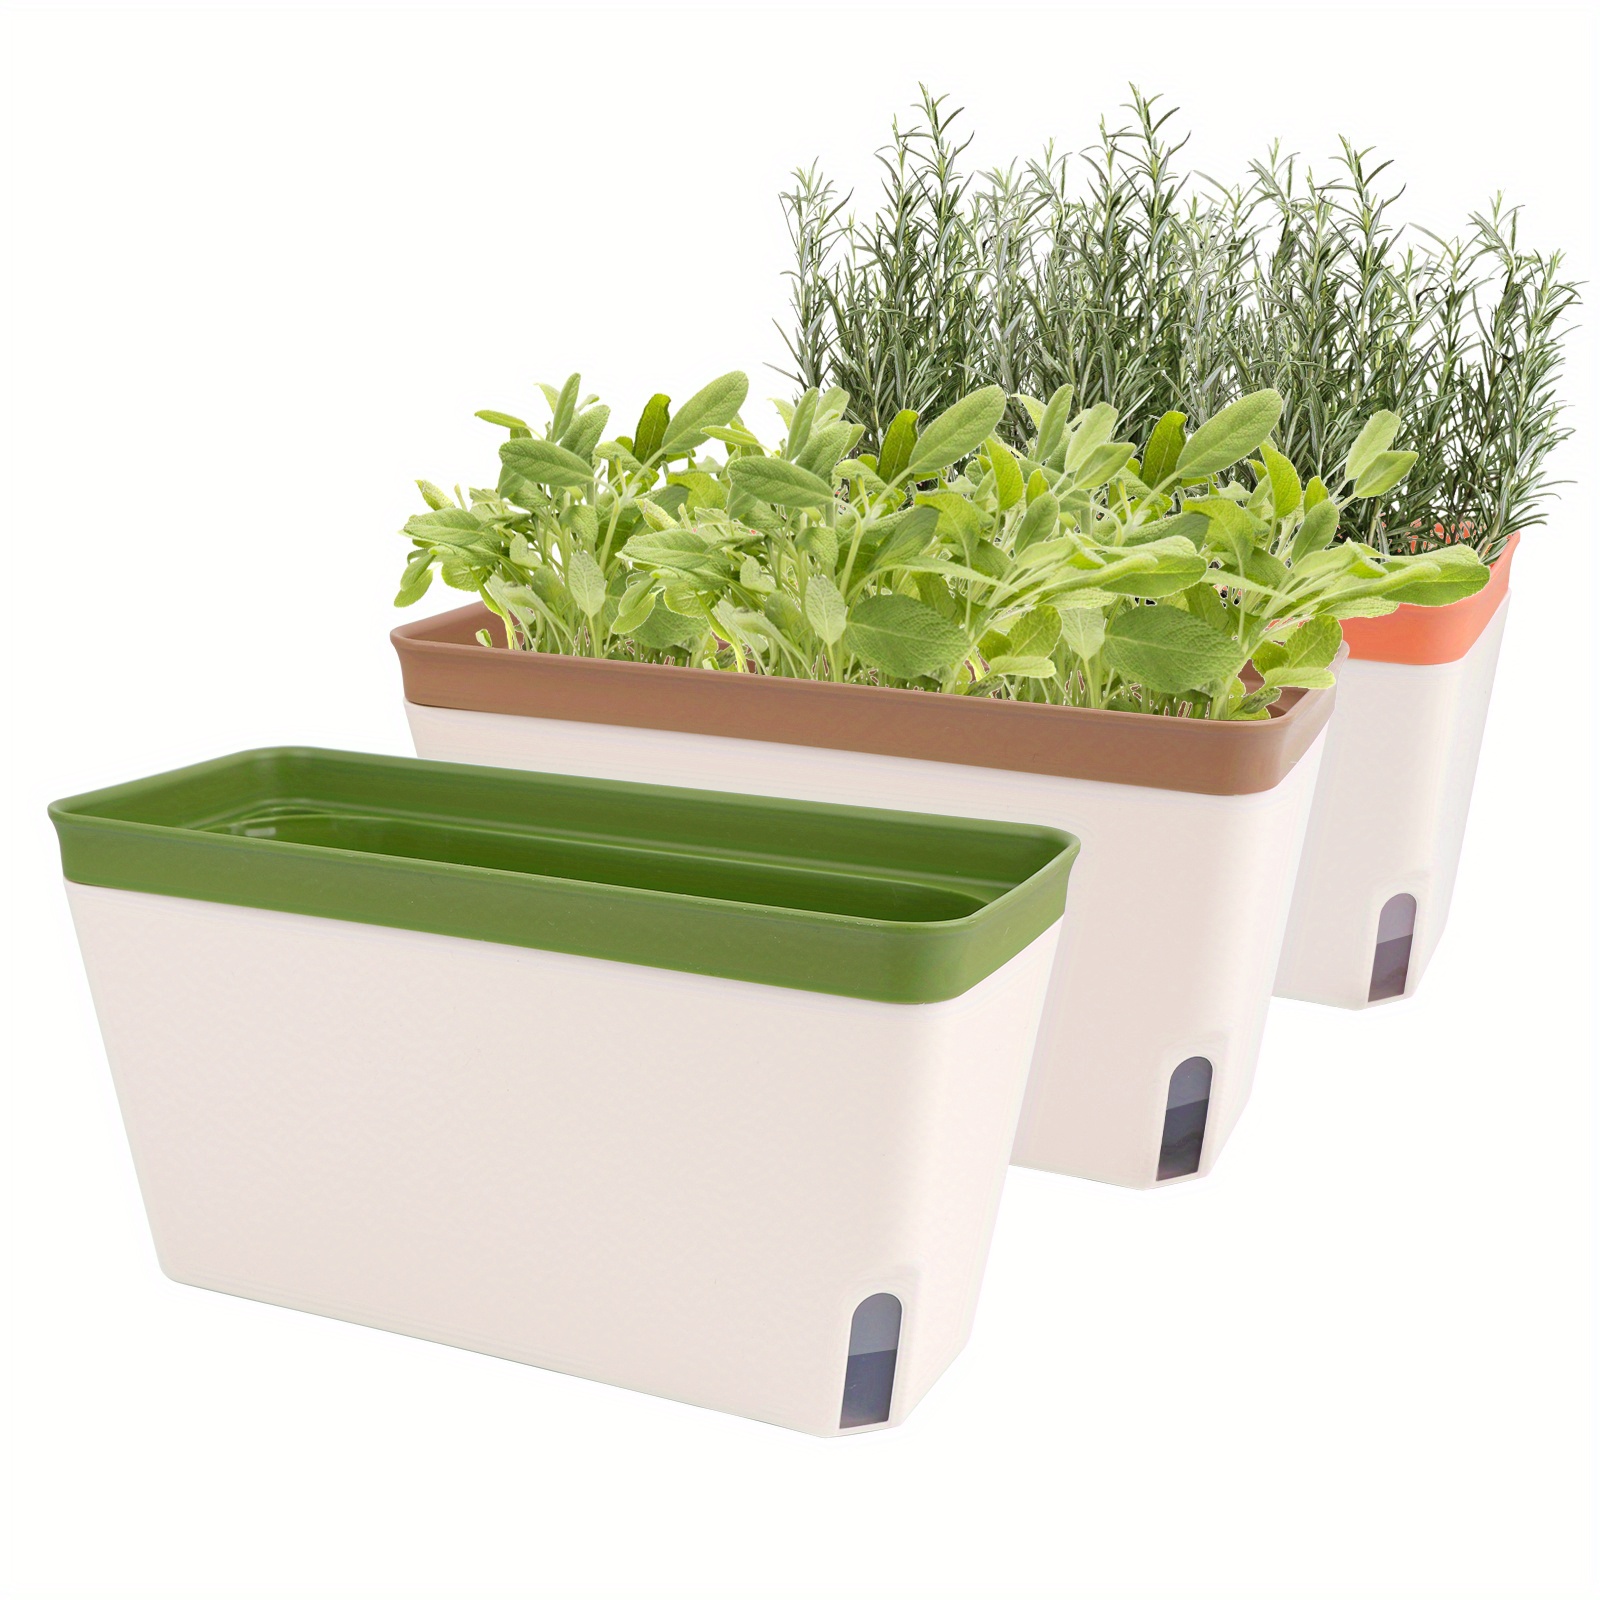 

3pcs, Windowsill Herb Planter Box Indoor Set Of 3, 10.5 Inch With Visual Water Level Window, Modern Plastic Plant Pots For Herbs, Vegetables, Succulents Plants